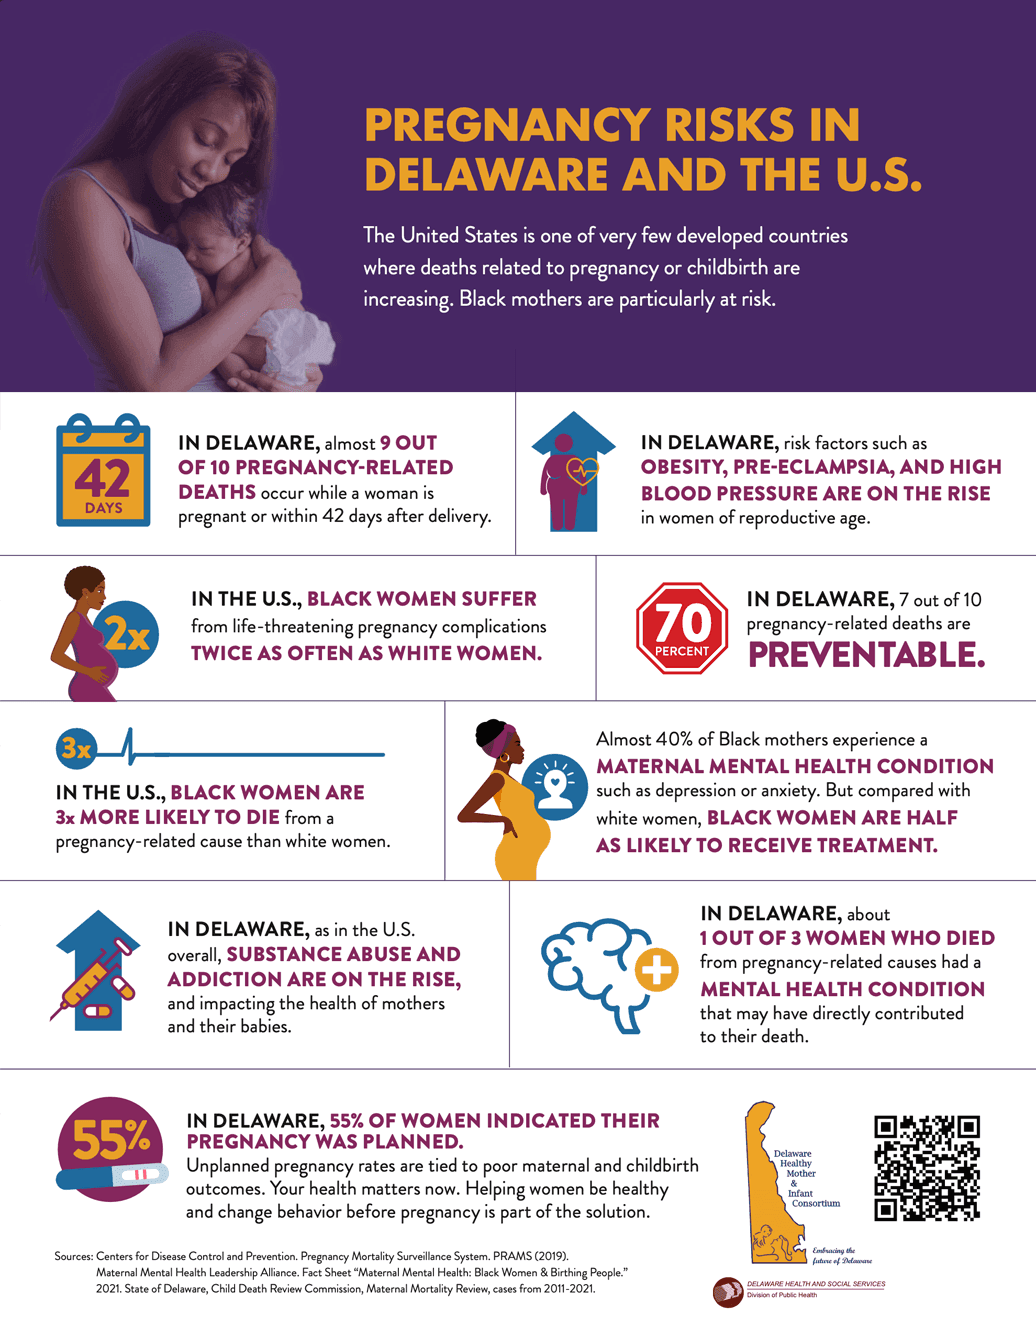 Black Maternal Health infographic. As Black women, we must be proactive.